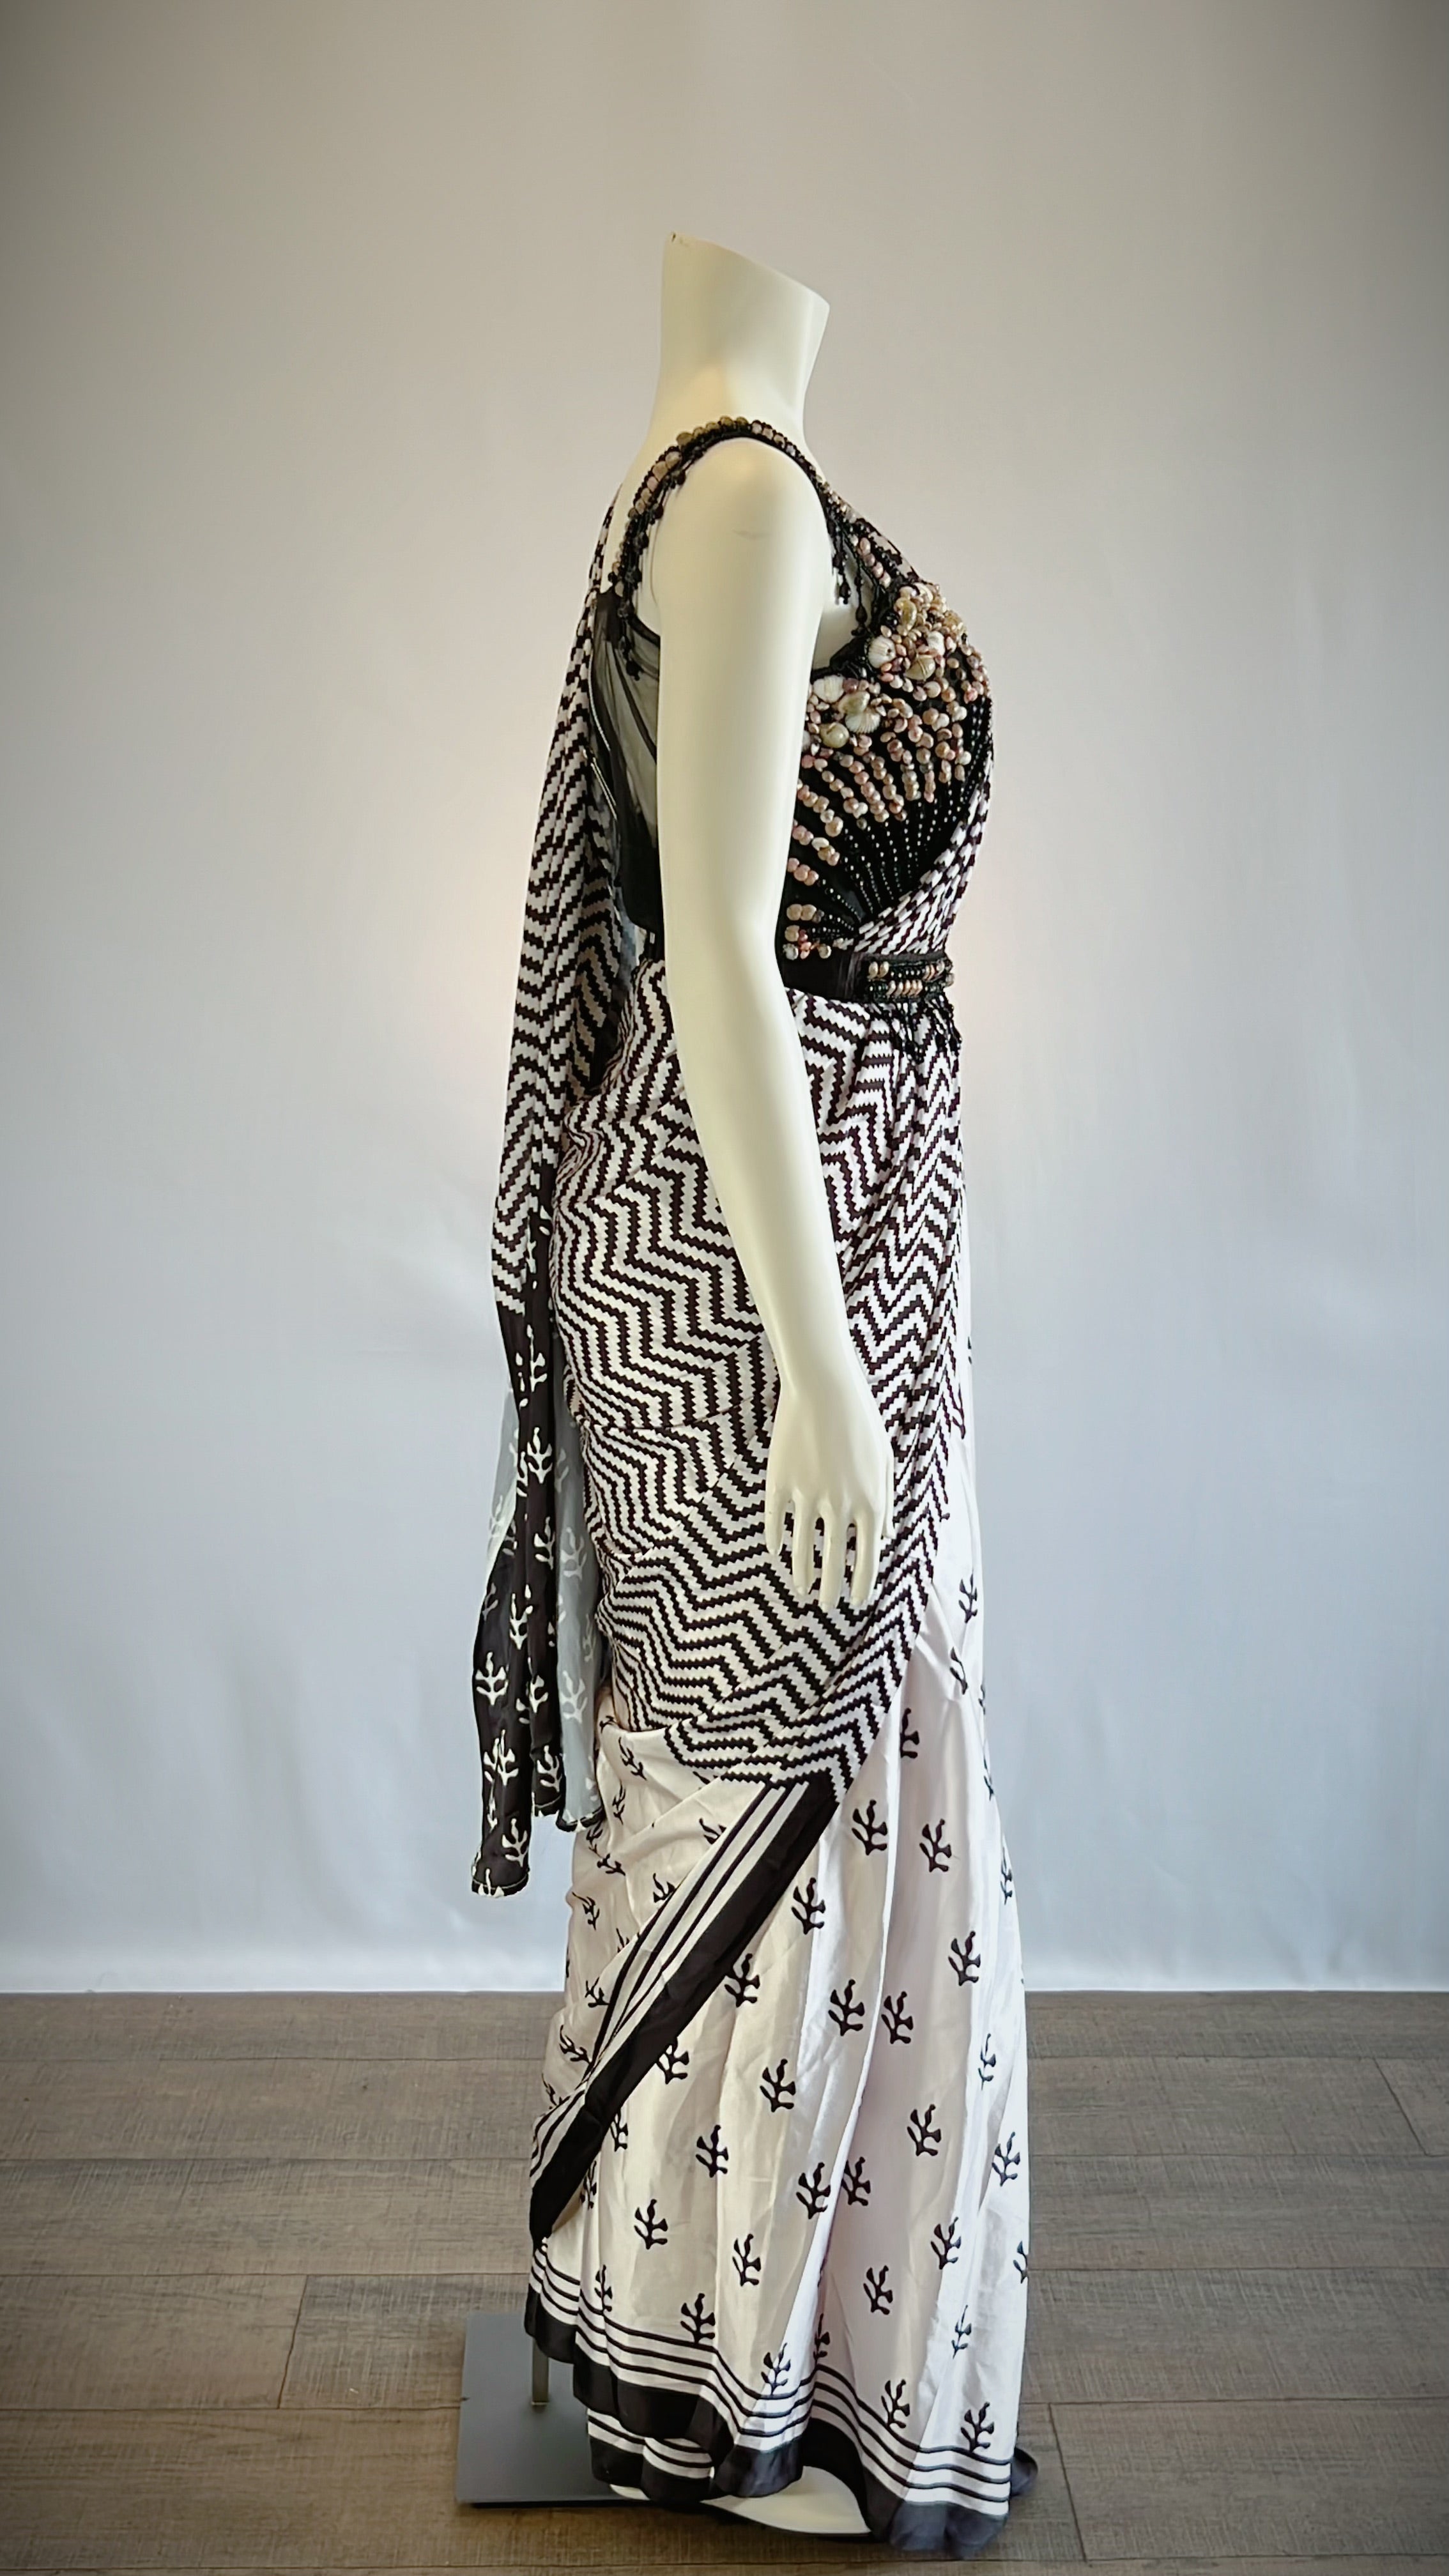 Pre-Stitched Printed Black and White Saree with Seashell Embroidery Blouse